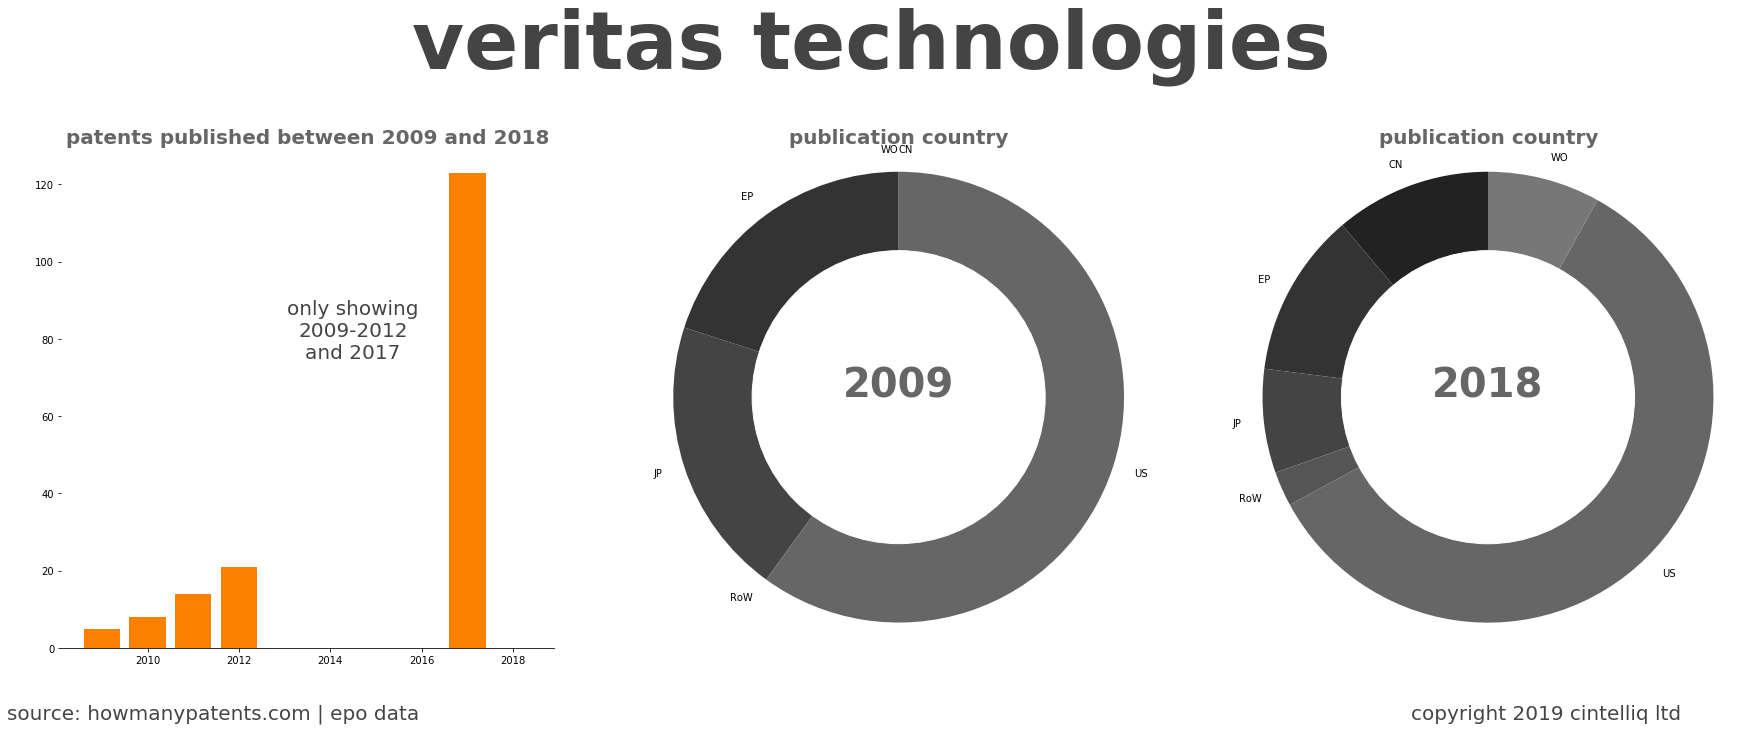 summary of patents for Veritas Technologies